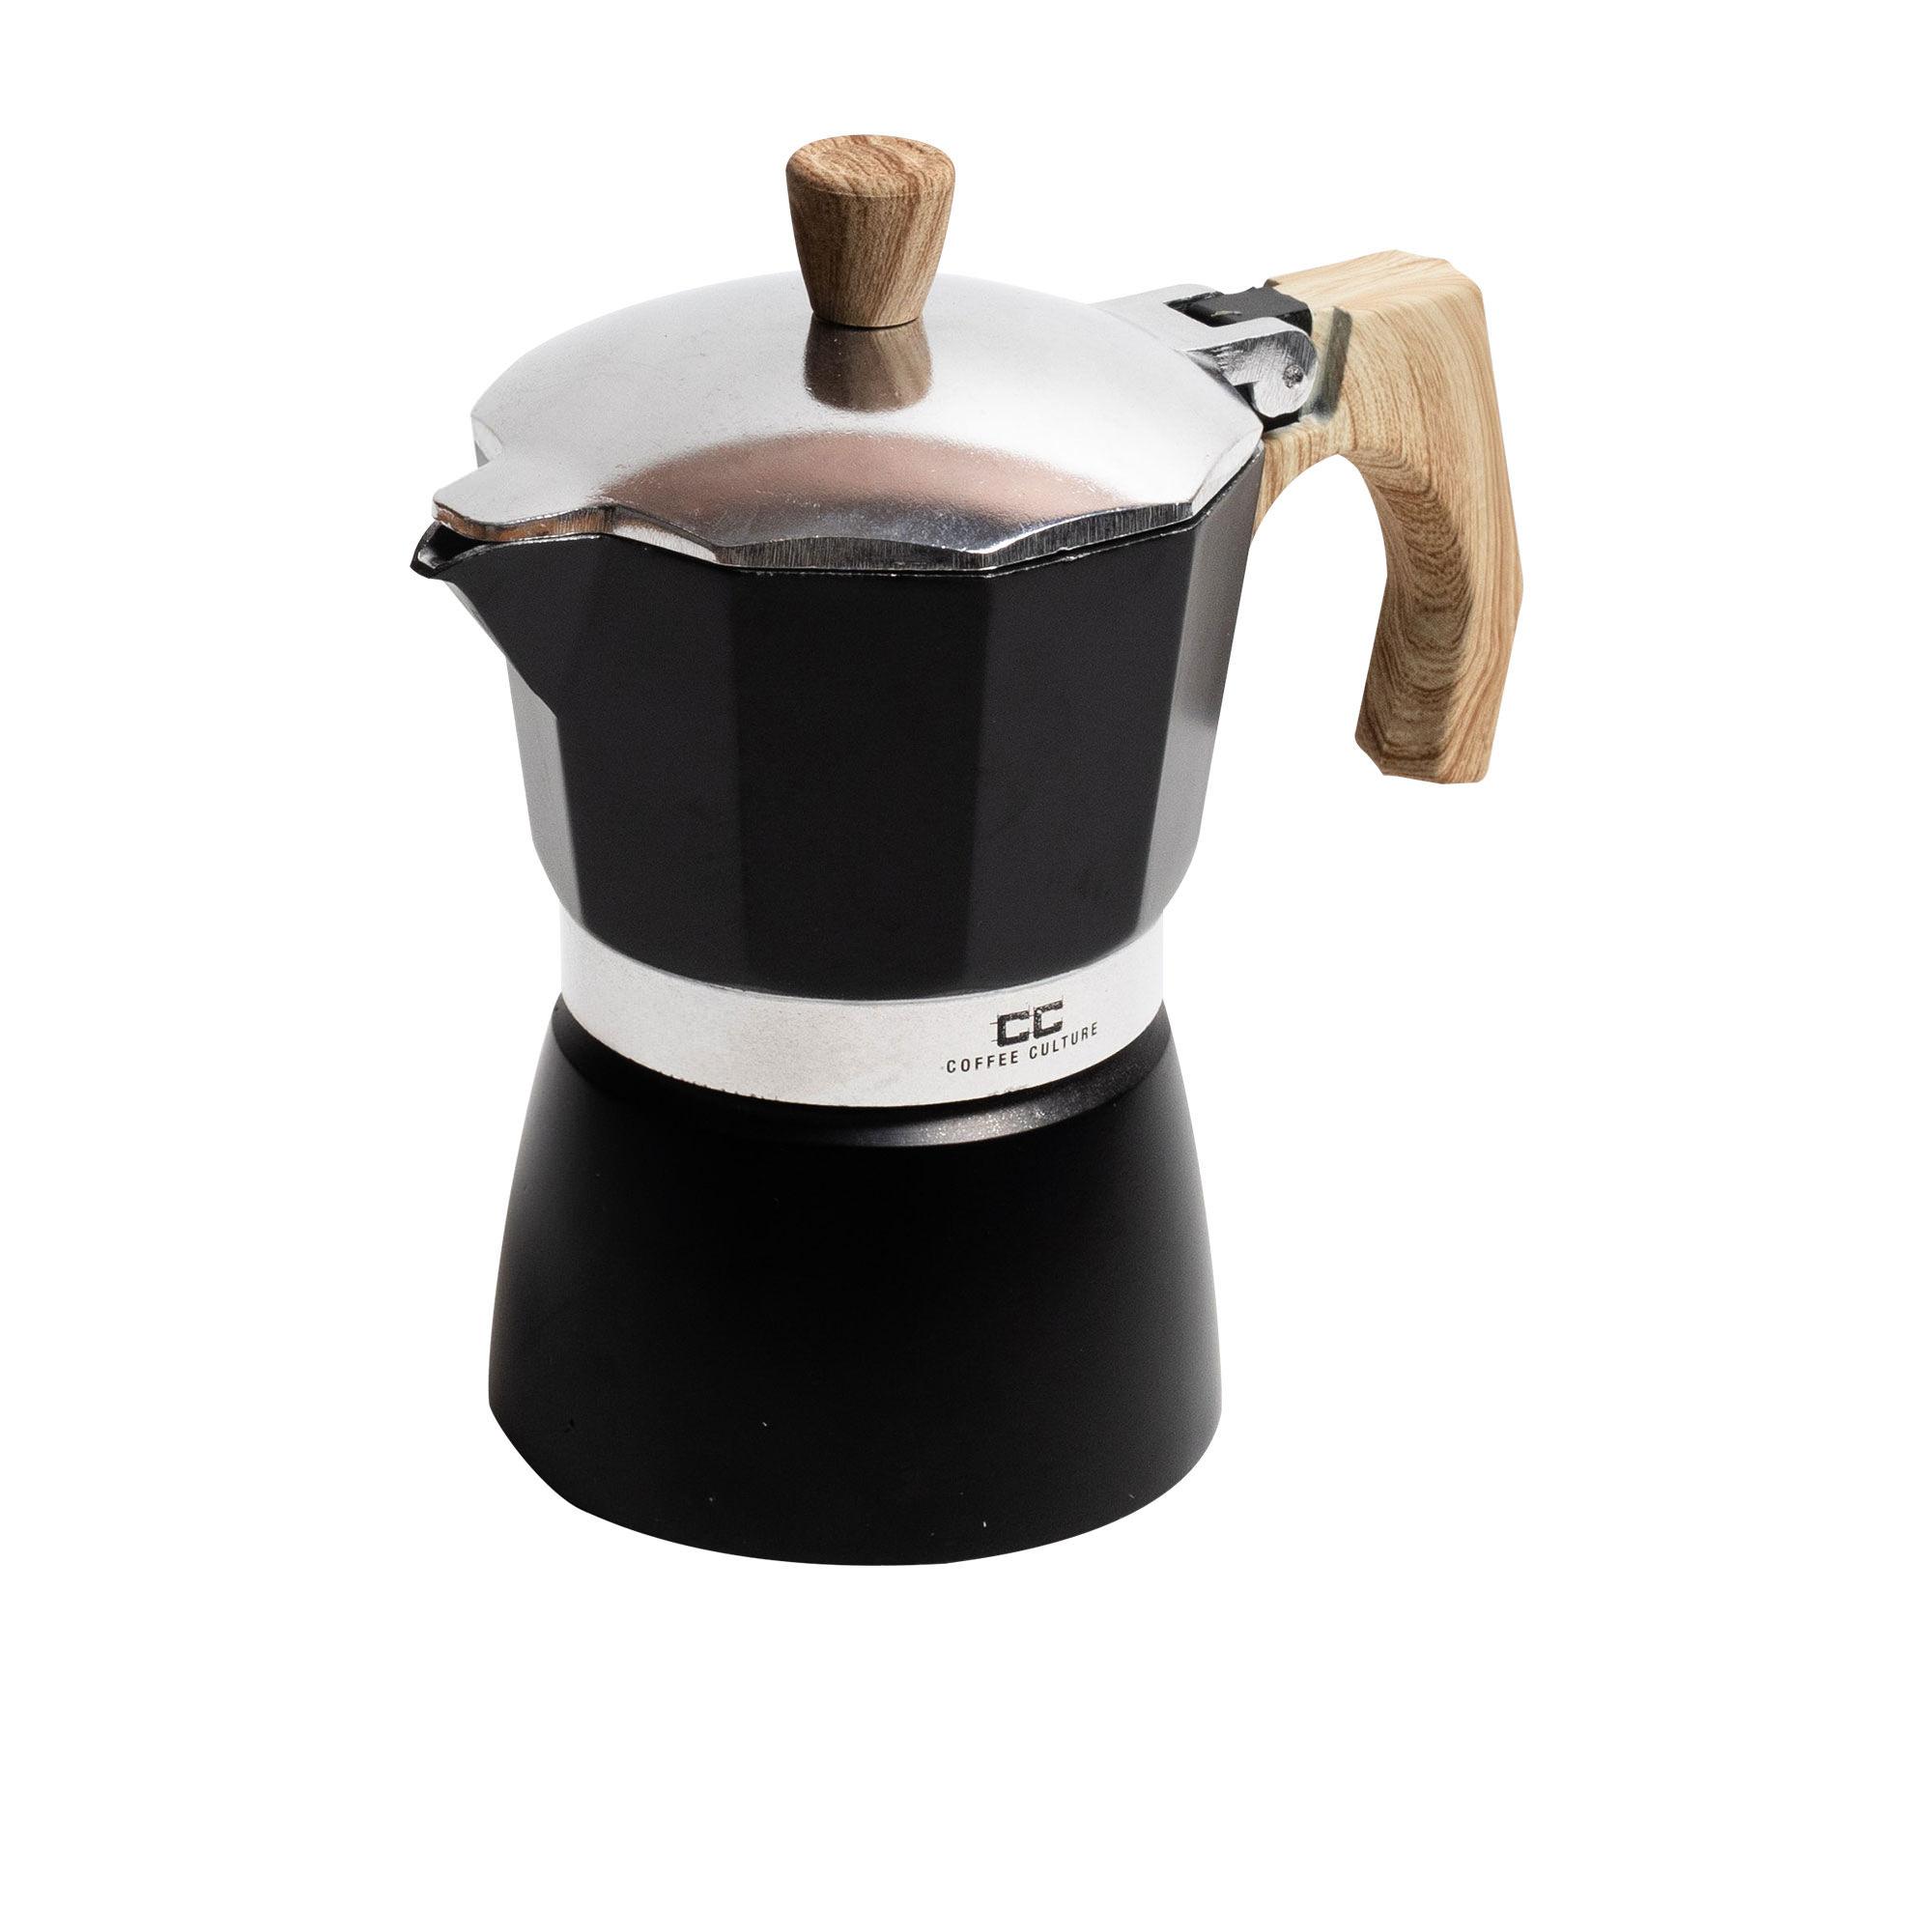 Coffee Culture Coffee Maker 3 Cup Black Image 3